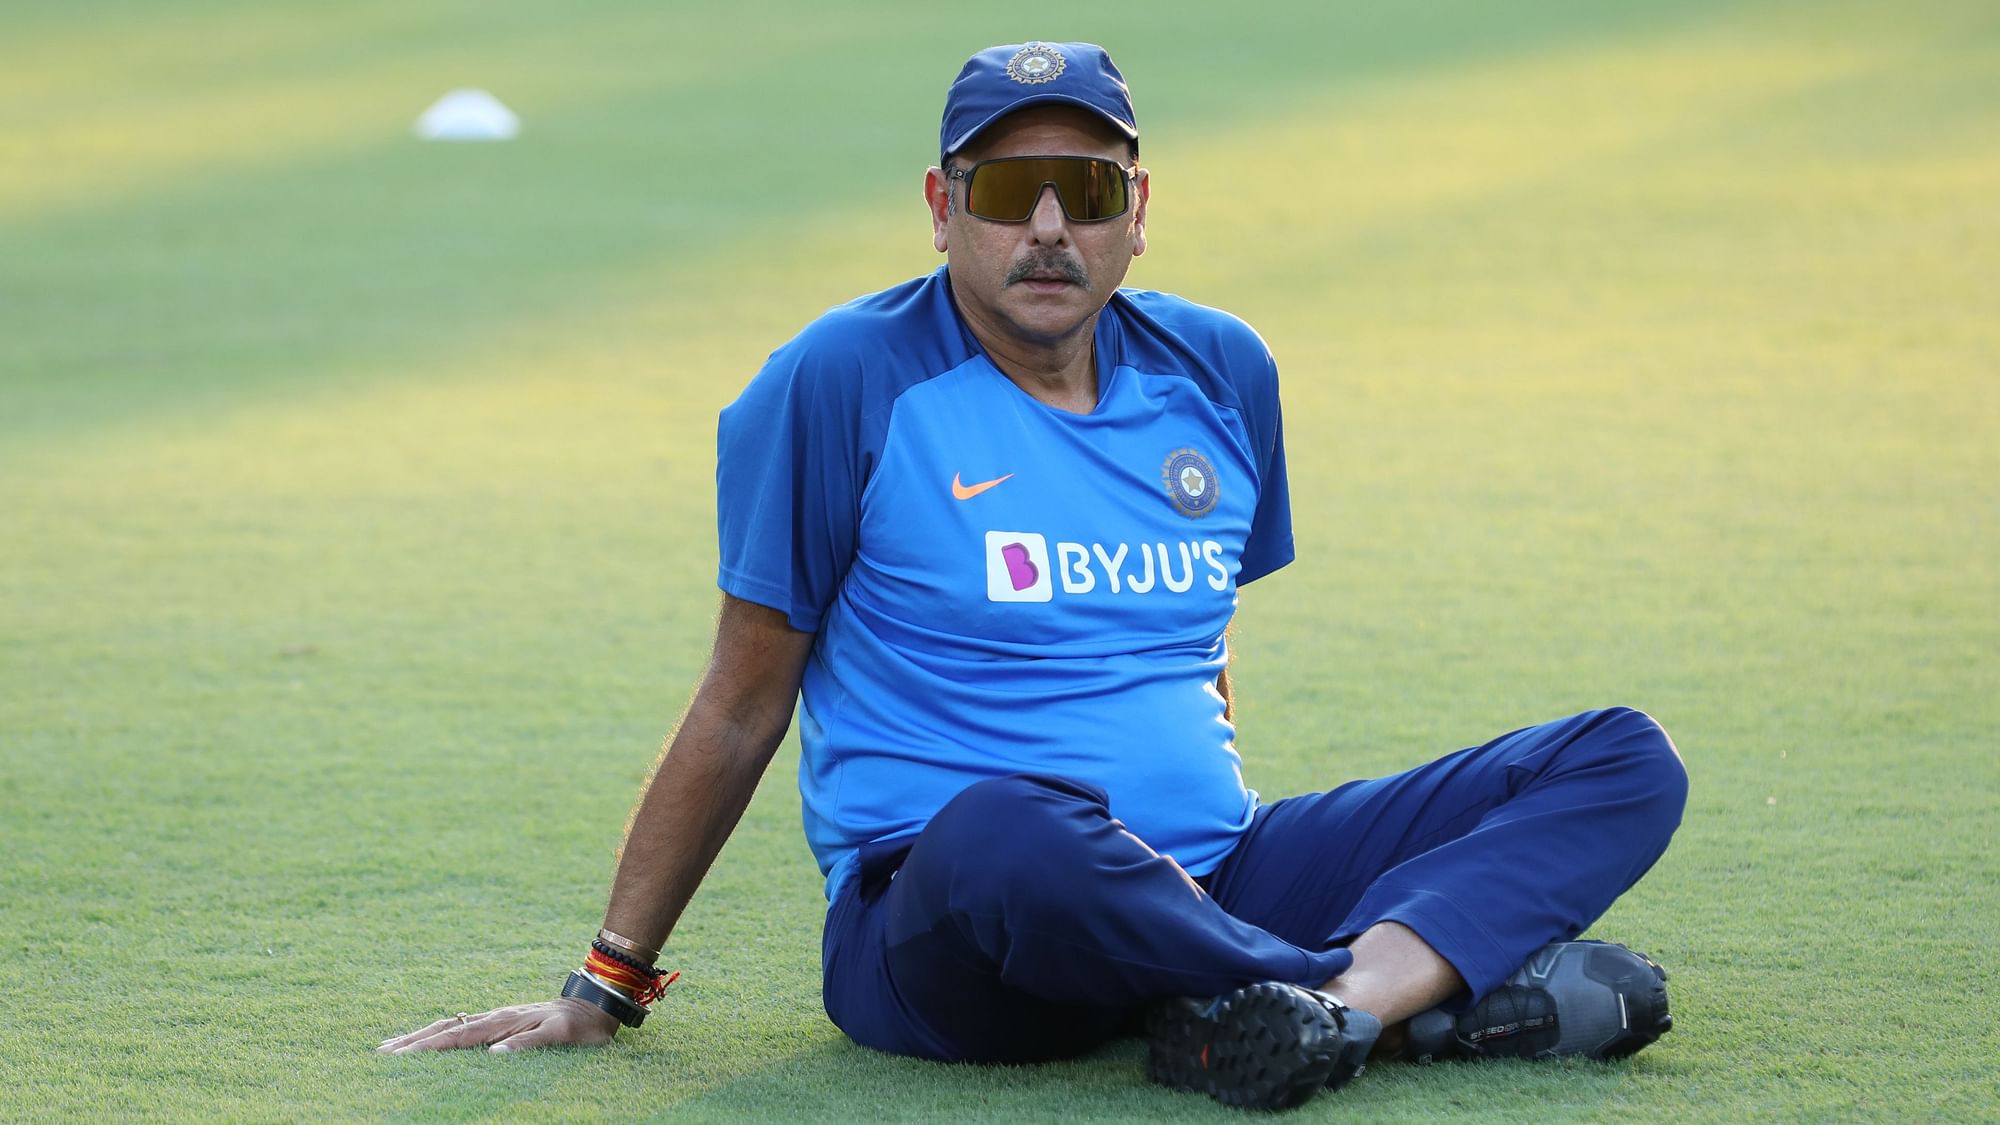 Ravi Shastri throws light on what made him believe that this team could be world beaters.